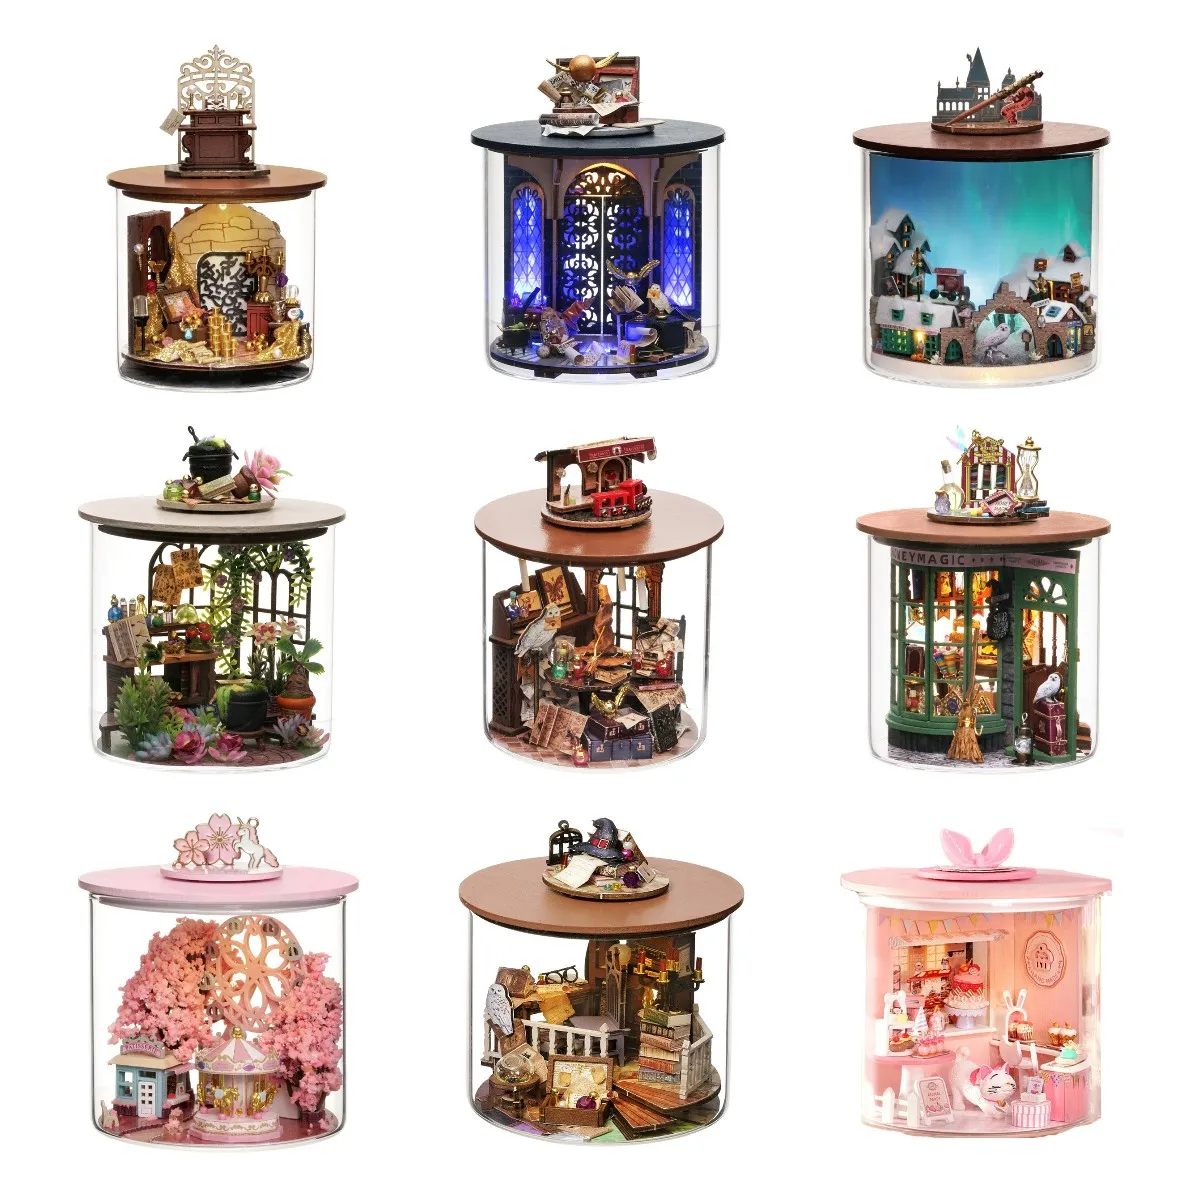 DIY Mini Casa Wooden Doll Houses Miniature Building Kit Time Magic Garden Dollhouse With Furniture Toys for Girls Birthday Gifts